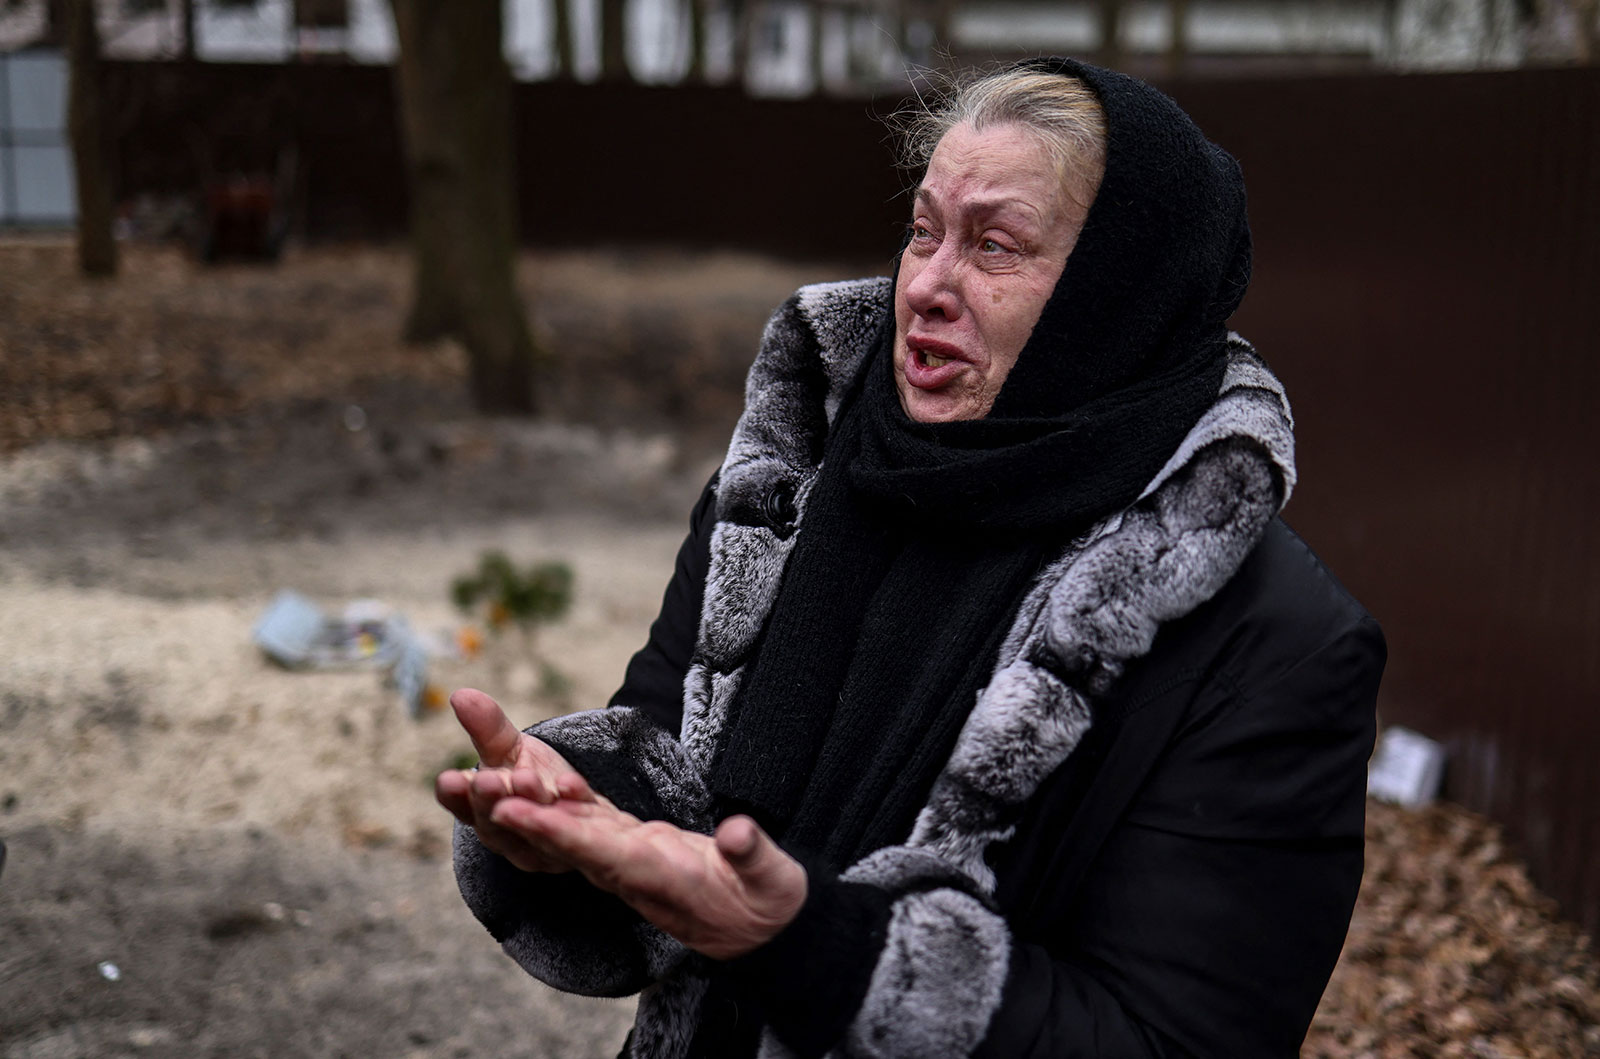 Resident Tetiana Ustymenko weeps over the grave of her son, buried in the garden of her house in Bucha on Wednesday, April 6. 